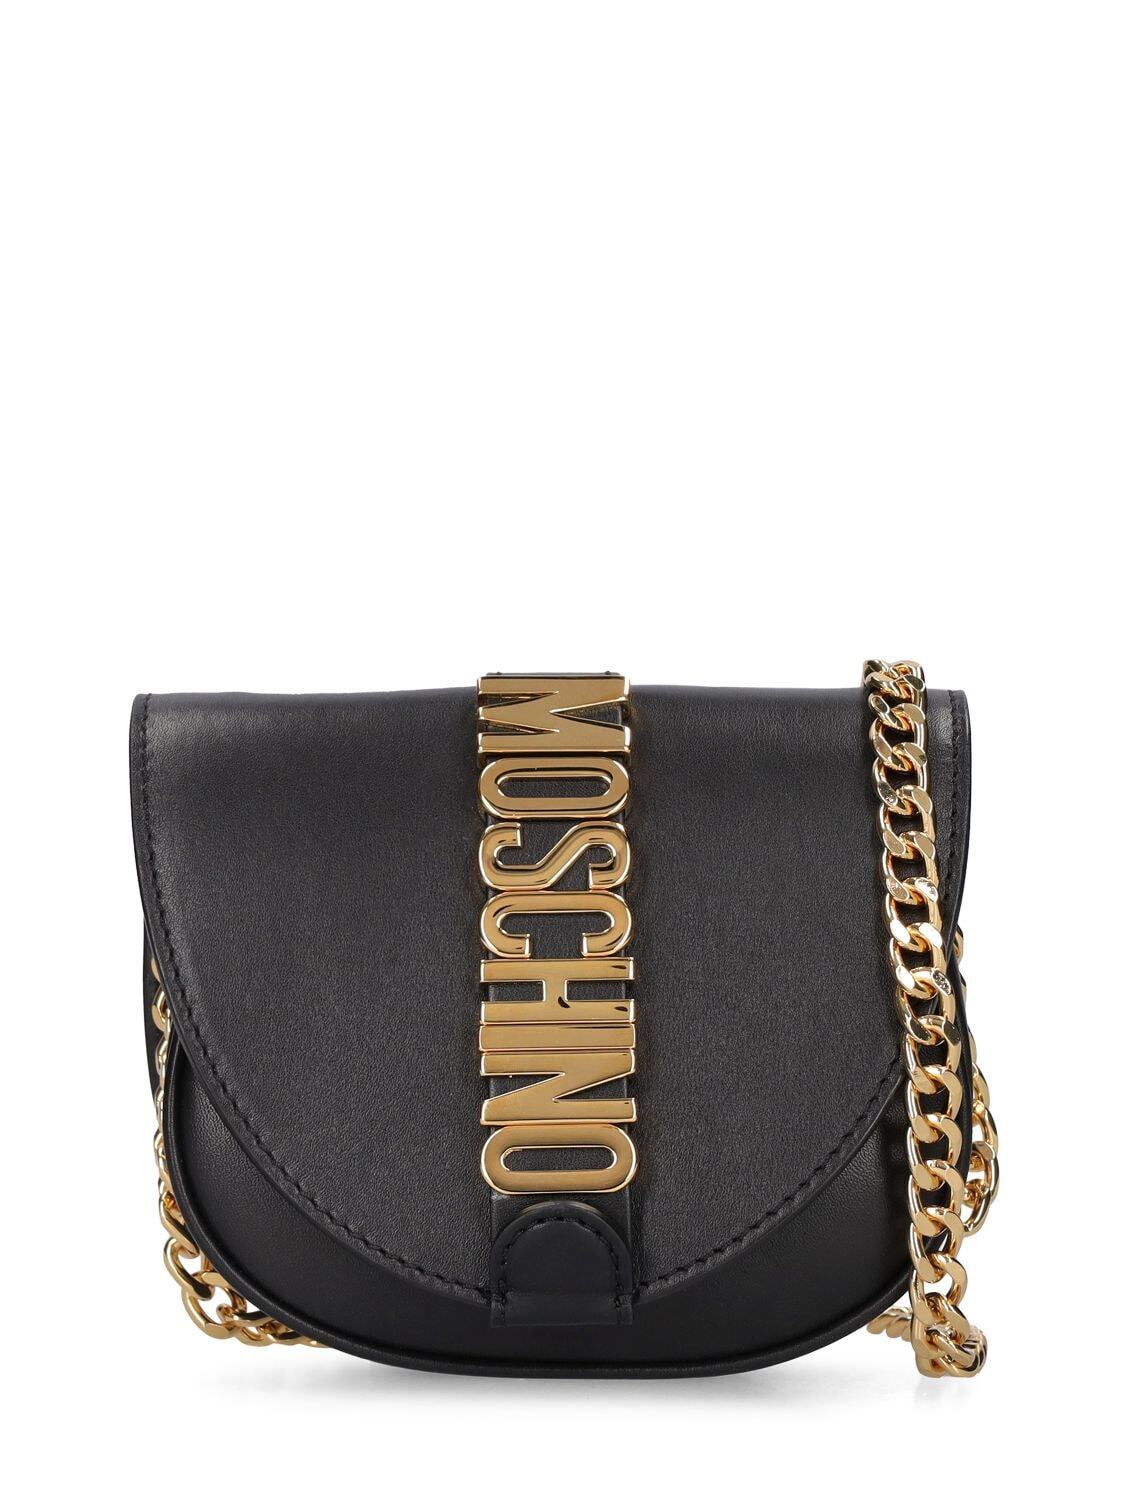 MOSCHINO Mini Leather Shoulder Bag in black